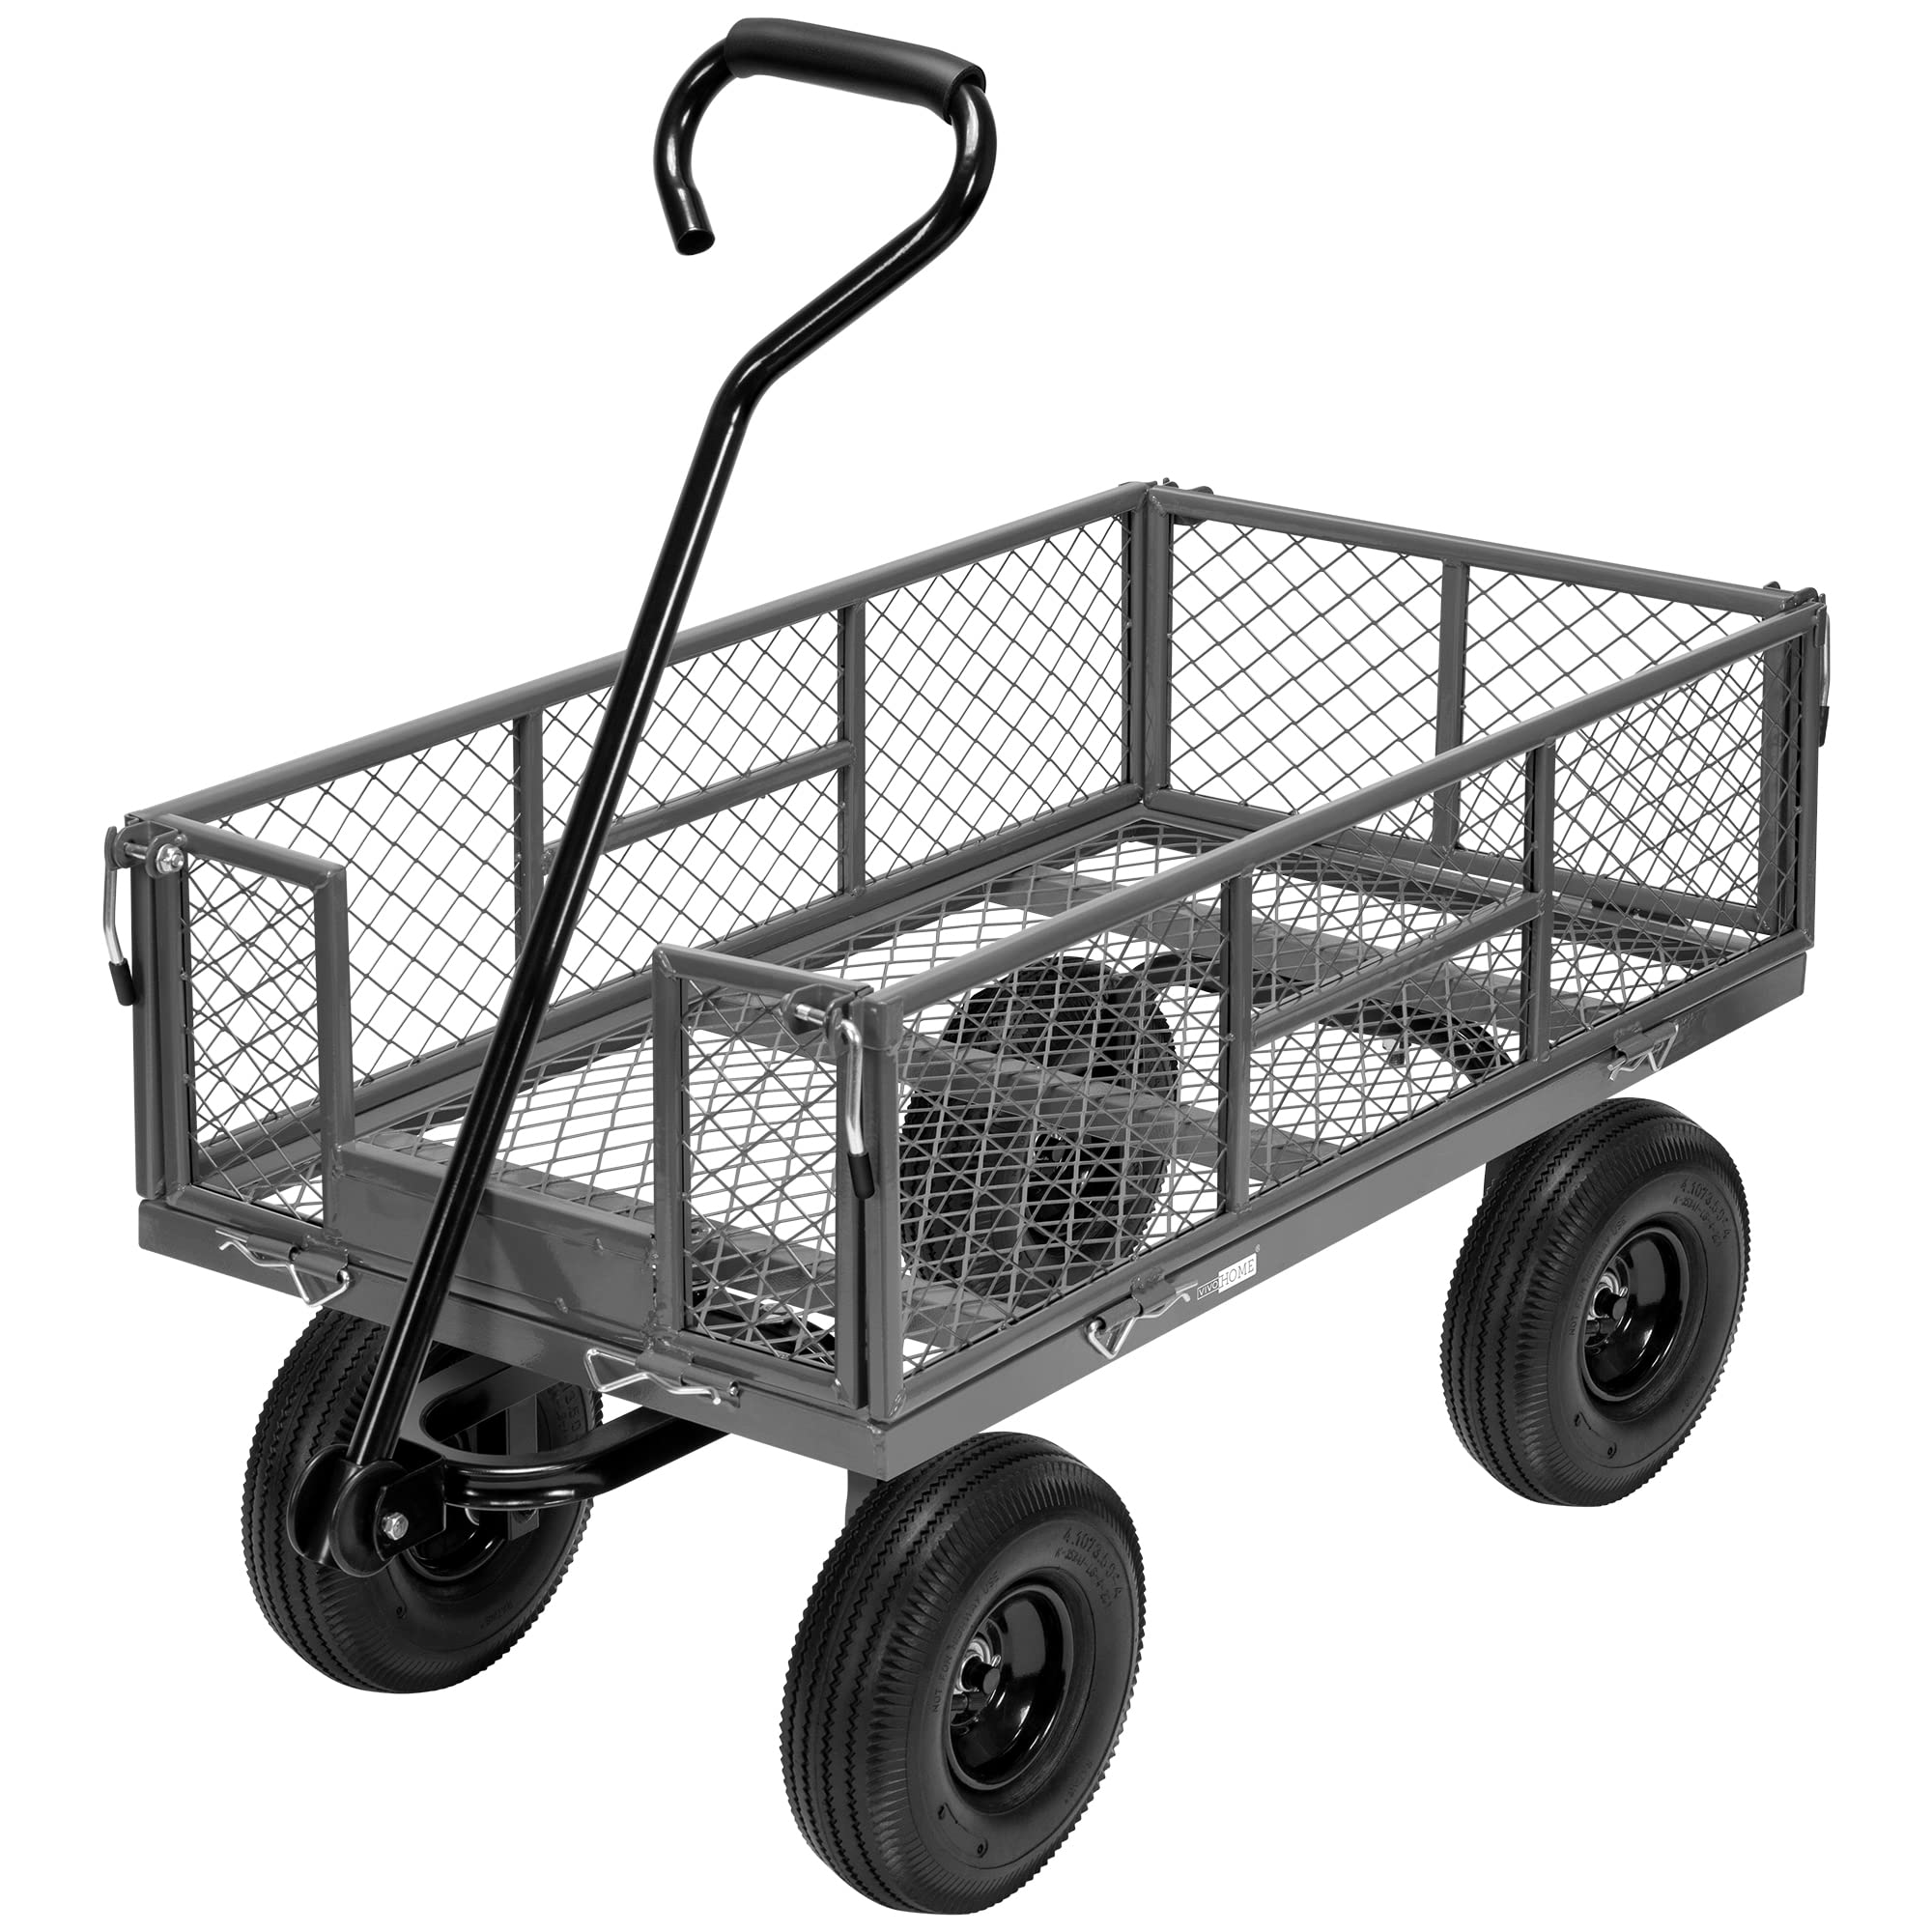 Folding Shopping Cart with Wheels, Collapsible Cart with Basket, 2-Layer  Utility Carts, Outdoor Wagon for Groceries, Hand Truck (Folding Cart +  Crate)